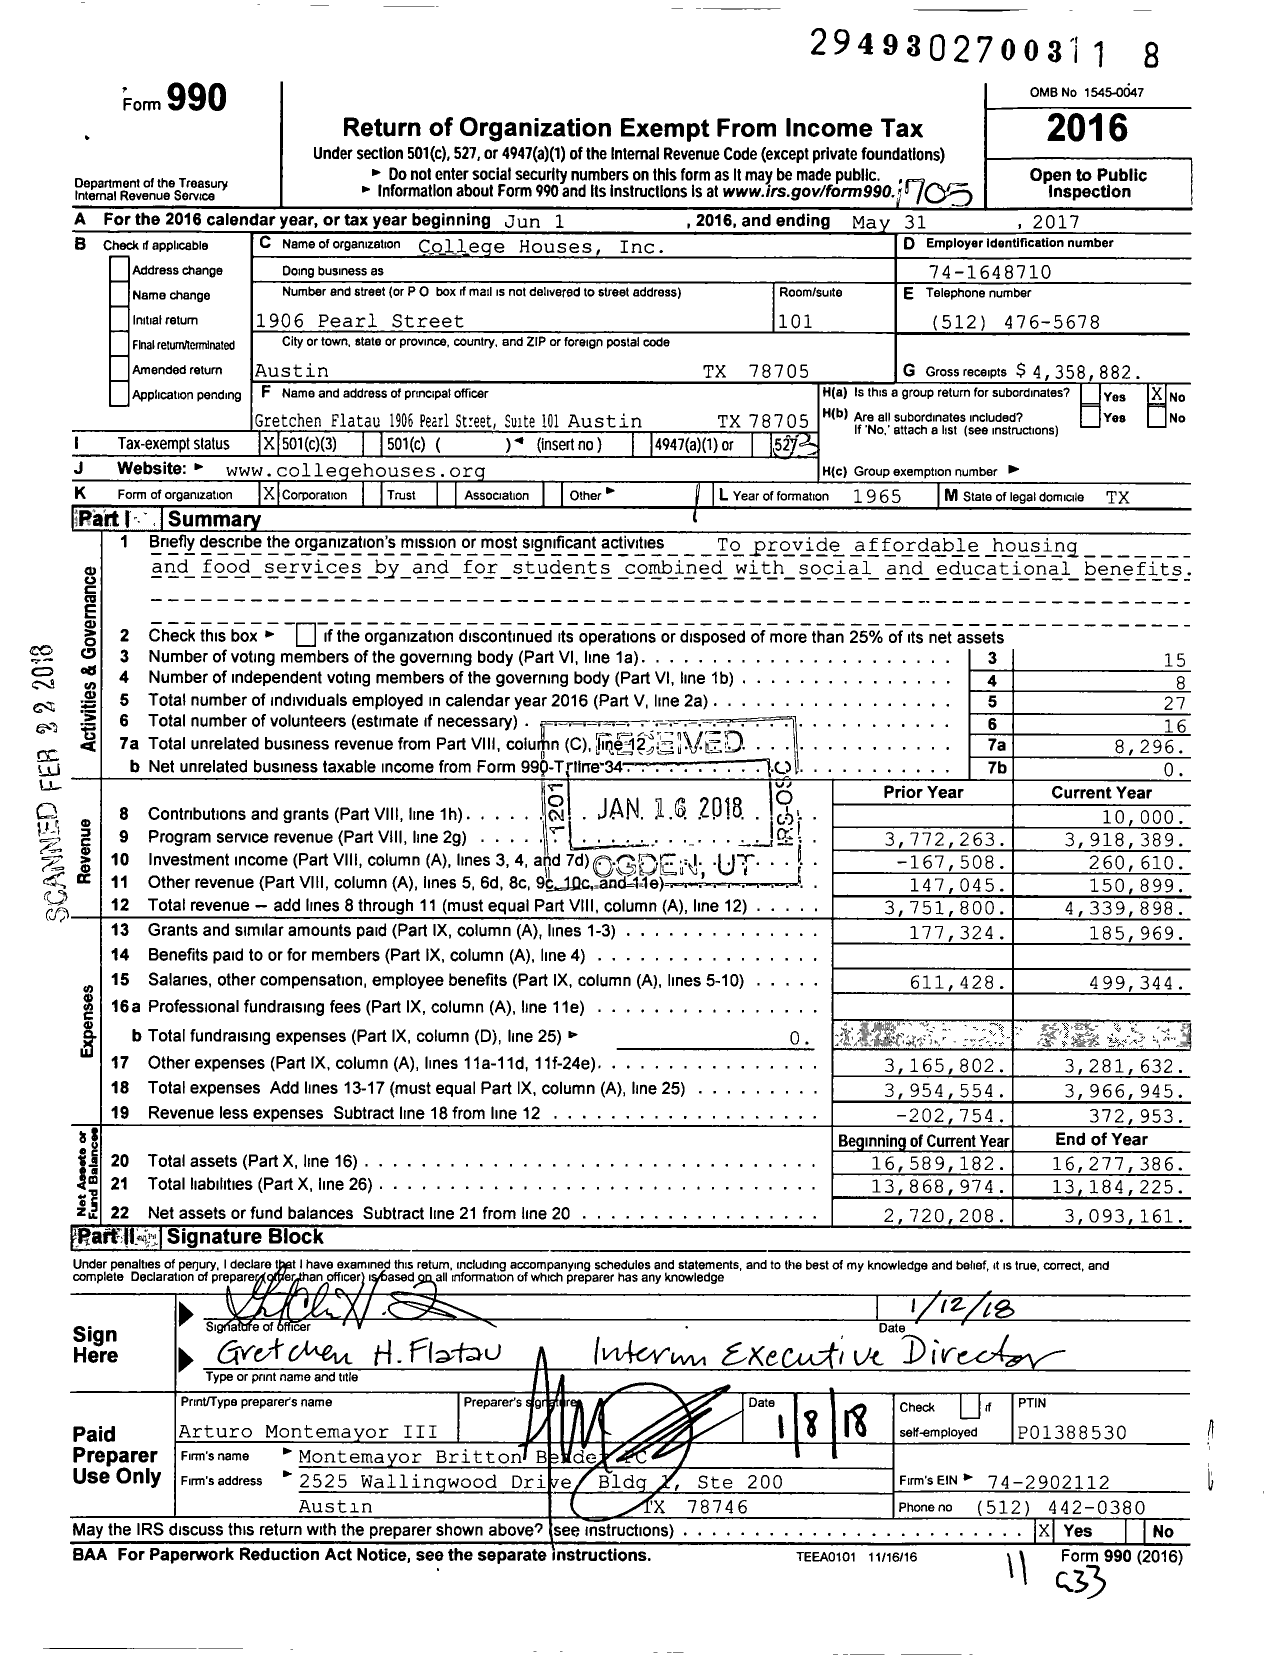 Image of first page of 2016 Form 990 for The College Houses